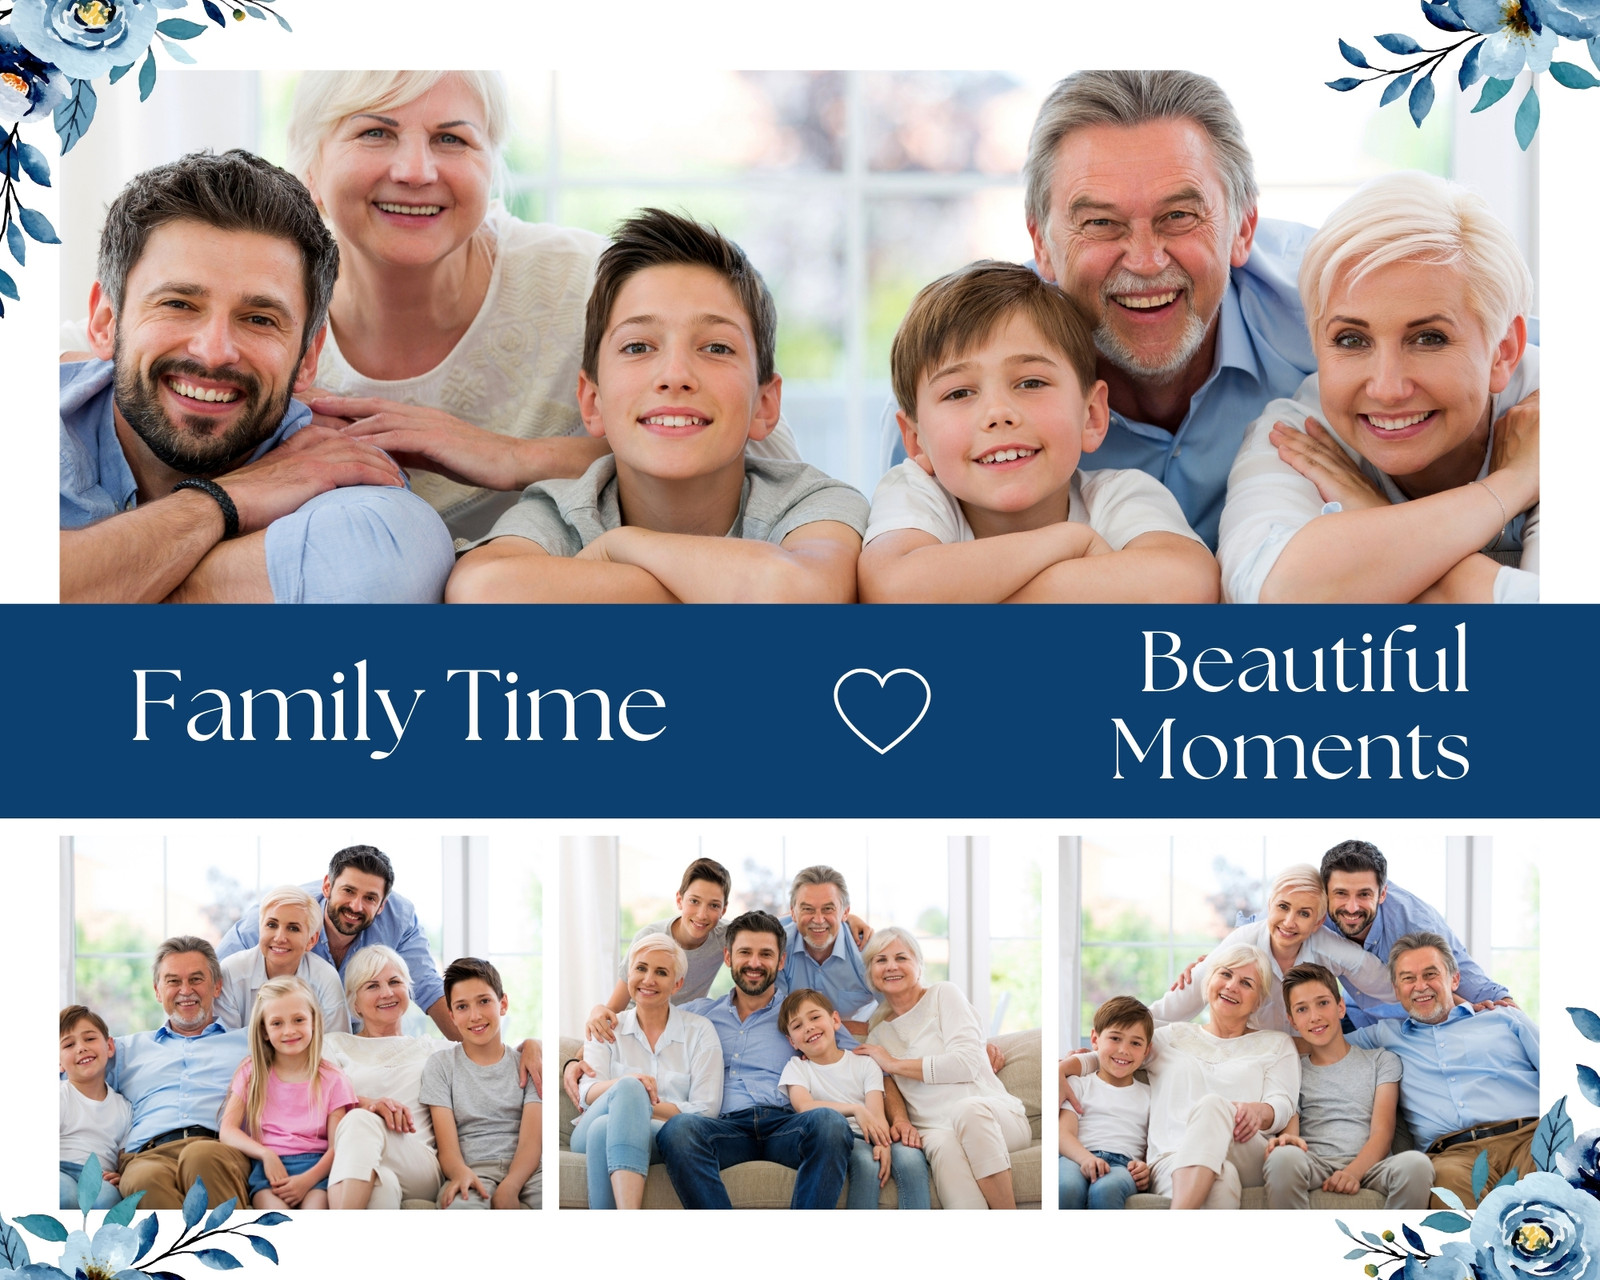 geur gloeilamp ontrouw Page 13 - Free and customizable family photo collage templates | Canva